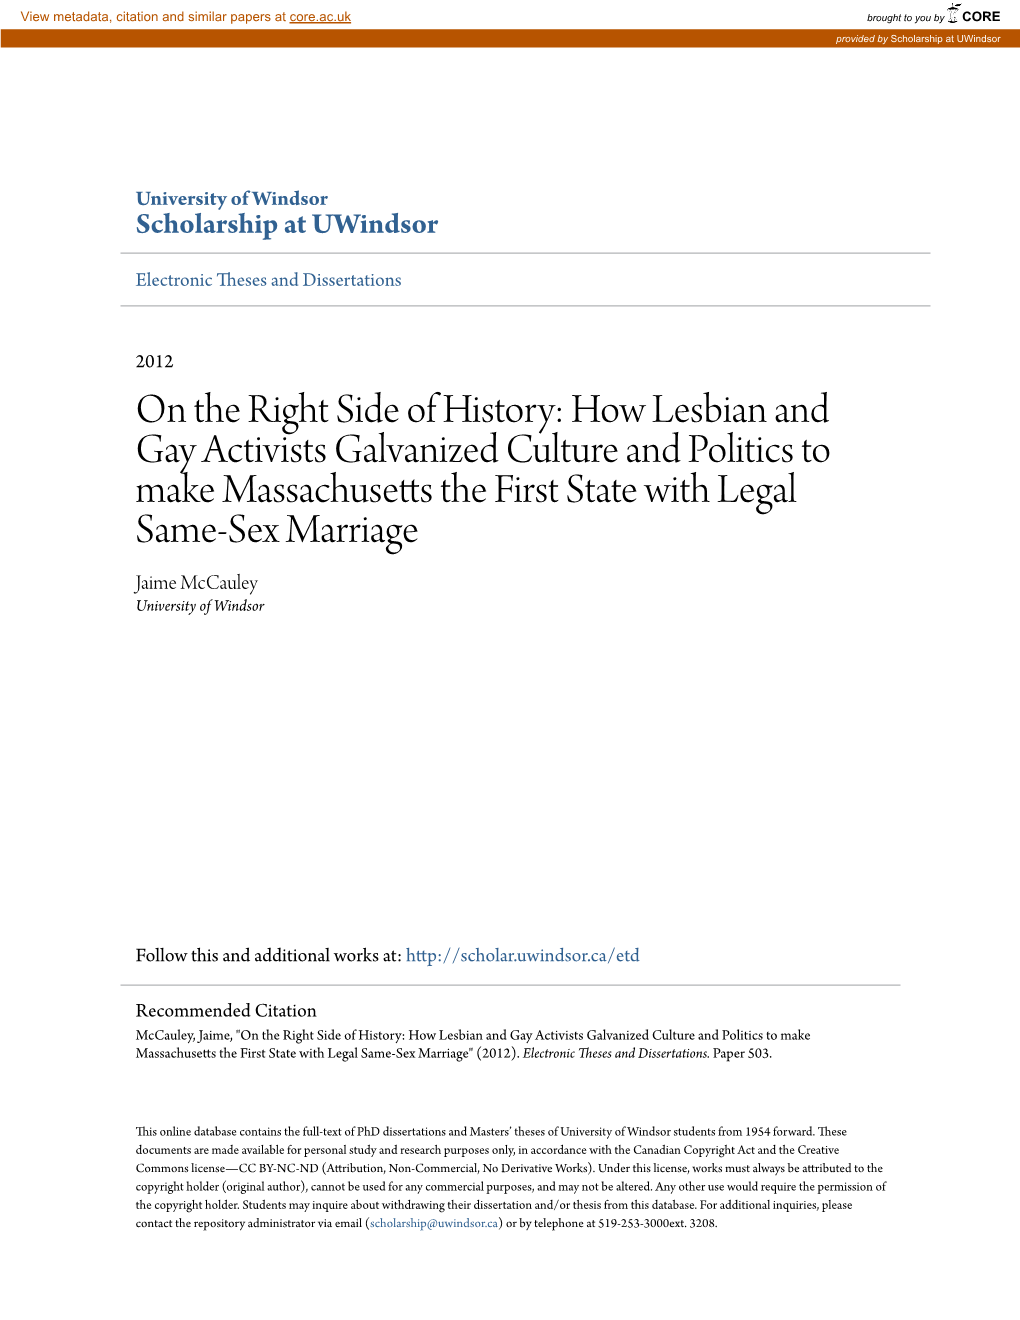 How Lesbian and Gay Activists Galvanized Culture and Politics to Make Massachusetts the First State with Legal Same-Sex Marriage Jaime Mccauley University of Windsor